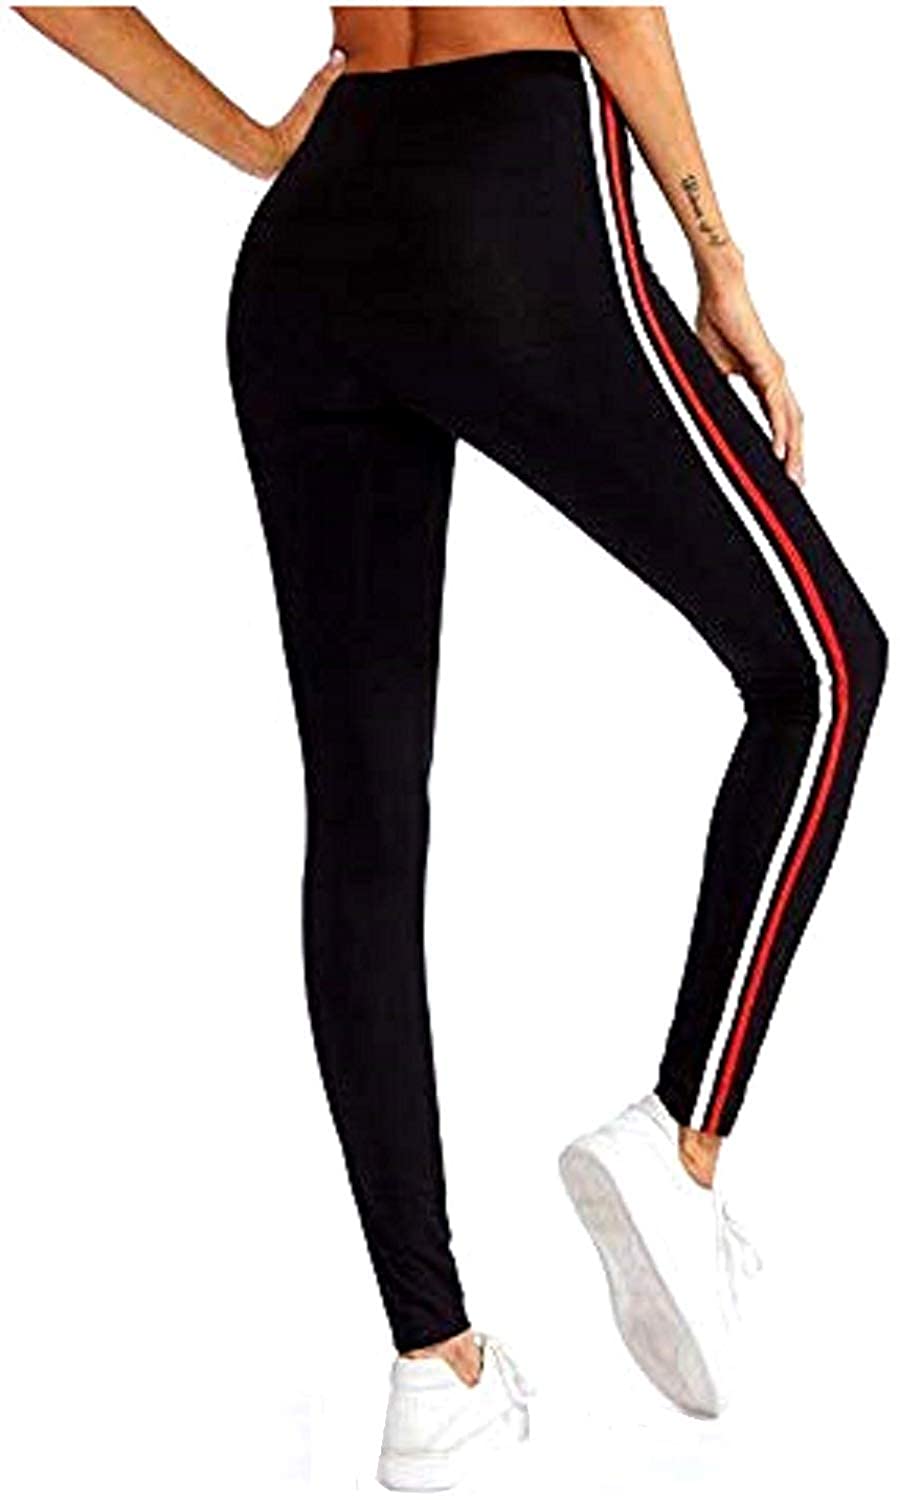 Women's stretch fit yoga pants from AGLOBI